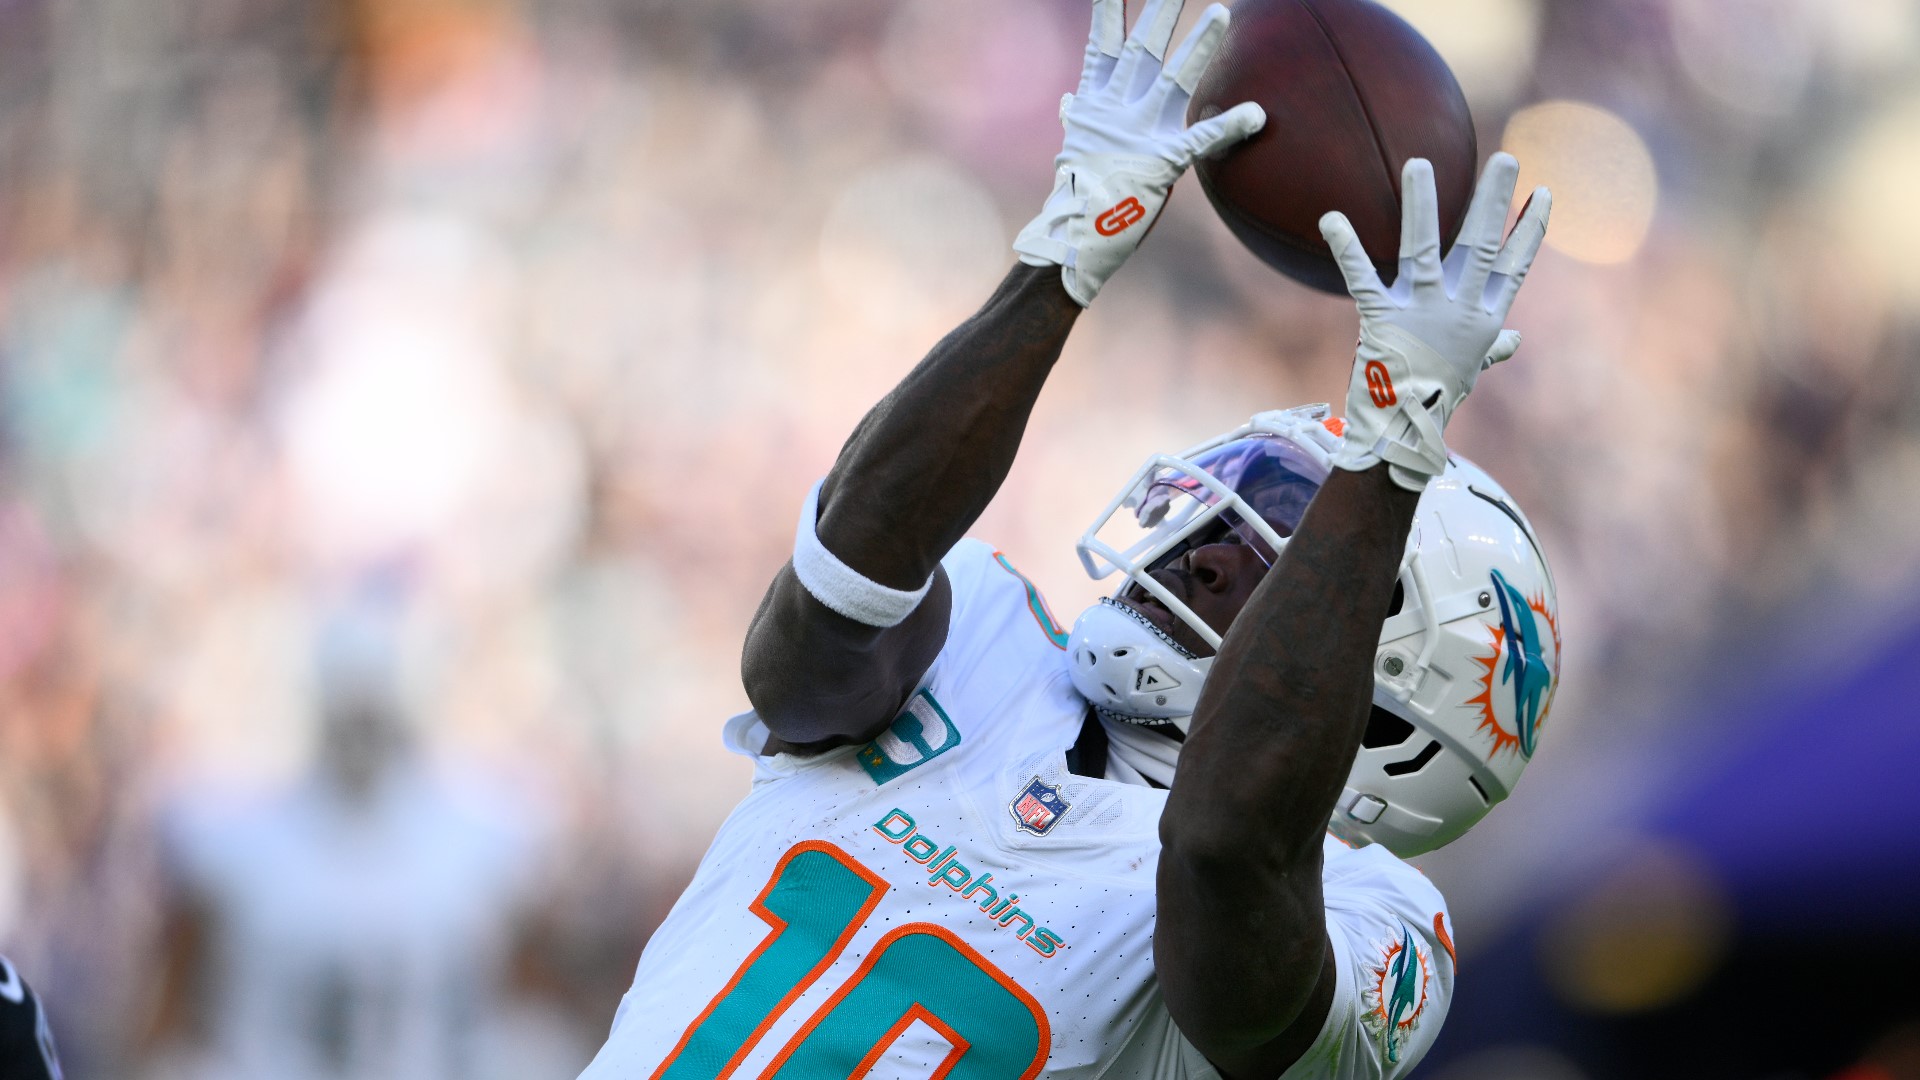 Miami Dolphins receiver Tyreek Hill and his family are safe after fire rescue crews responded to a large fire at his South Florida home Wednesday afternoon.